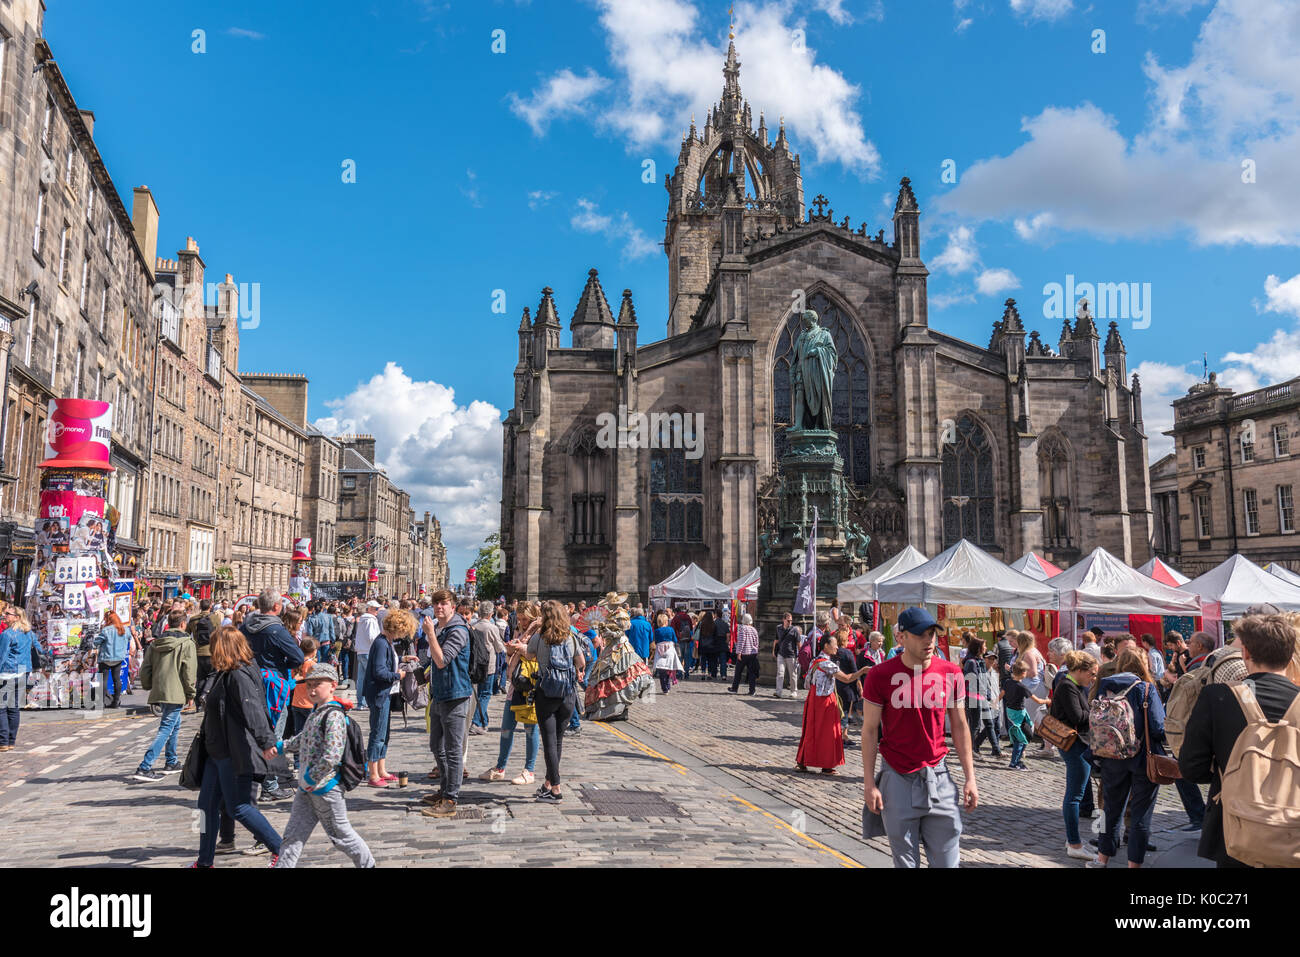 EDINBURGH, UNITED KINGDOM - AUGUST 15, 2017 - A boy advertises a theatrical performance along the Royal Mile of Edinburgh during the 70th anniversary  Stock Photo